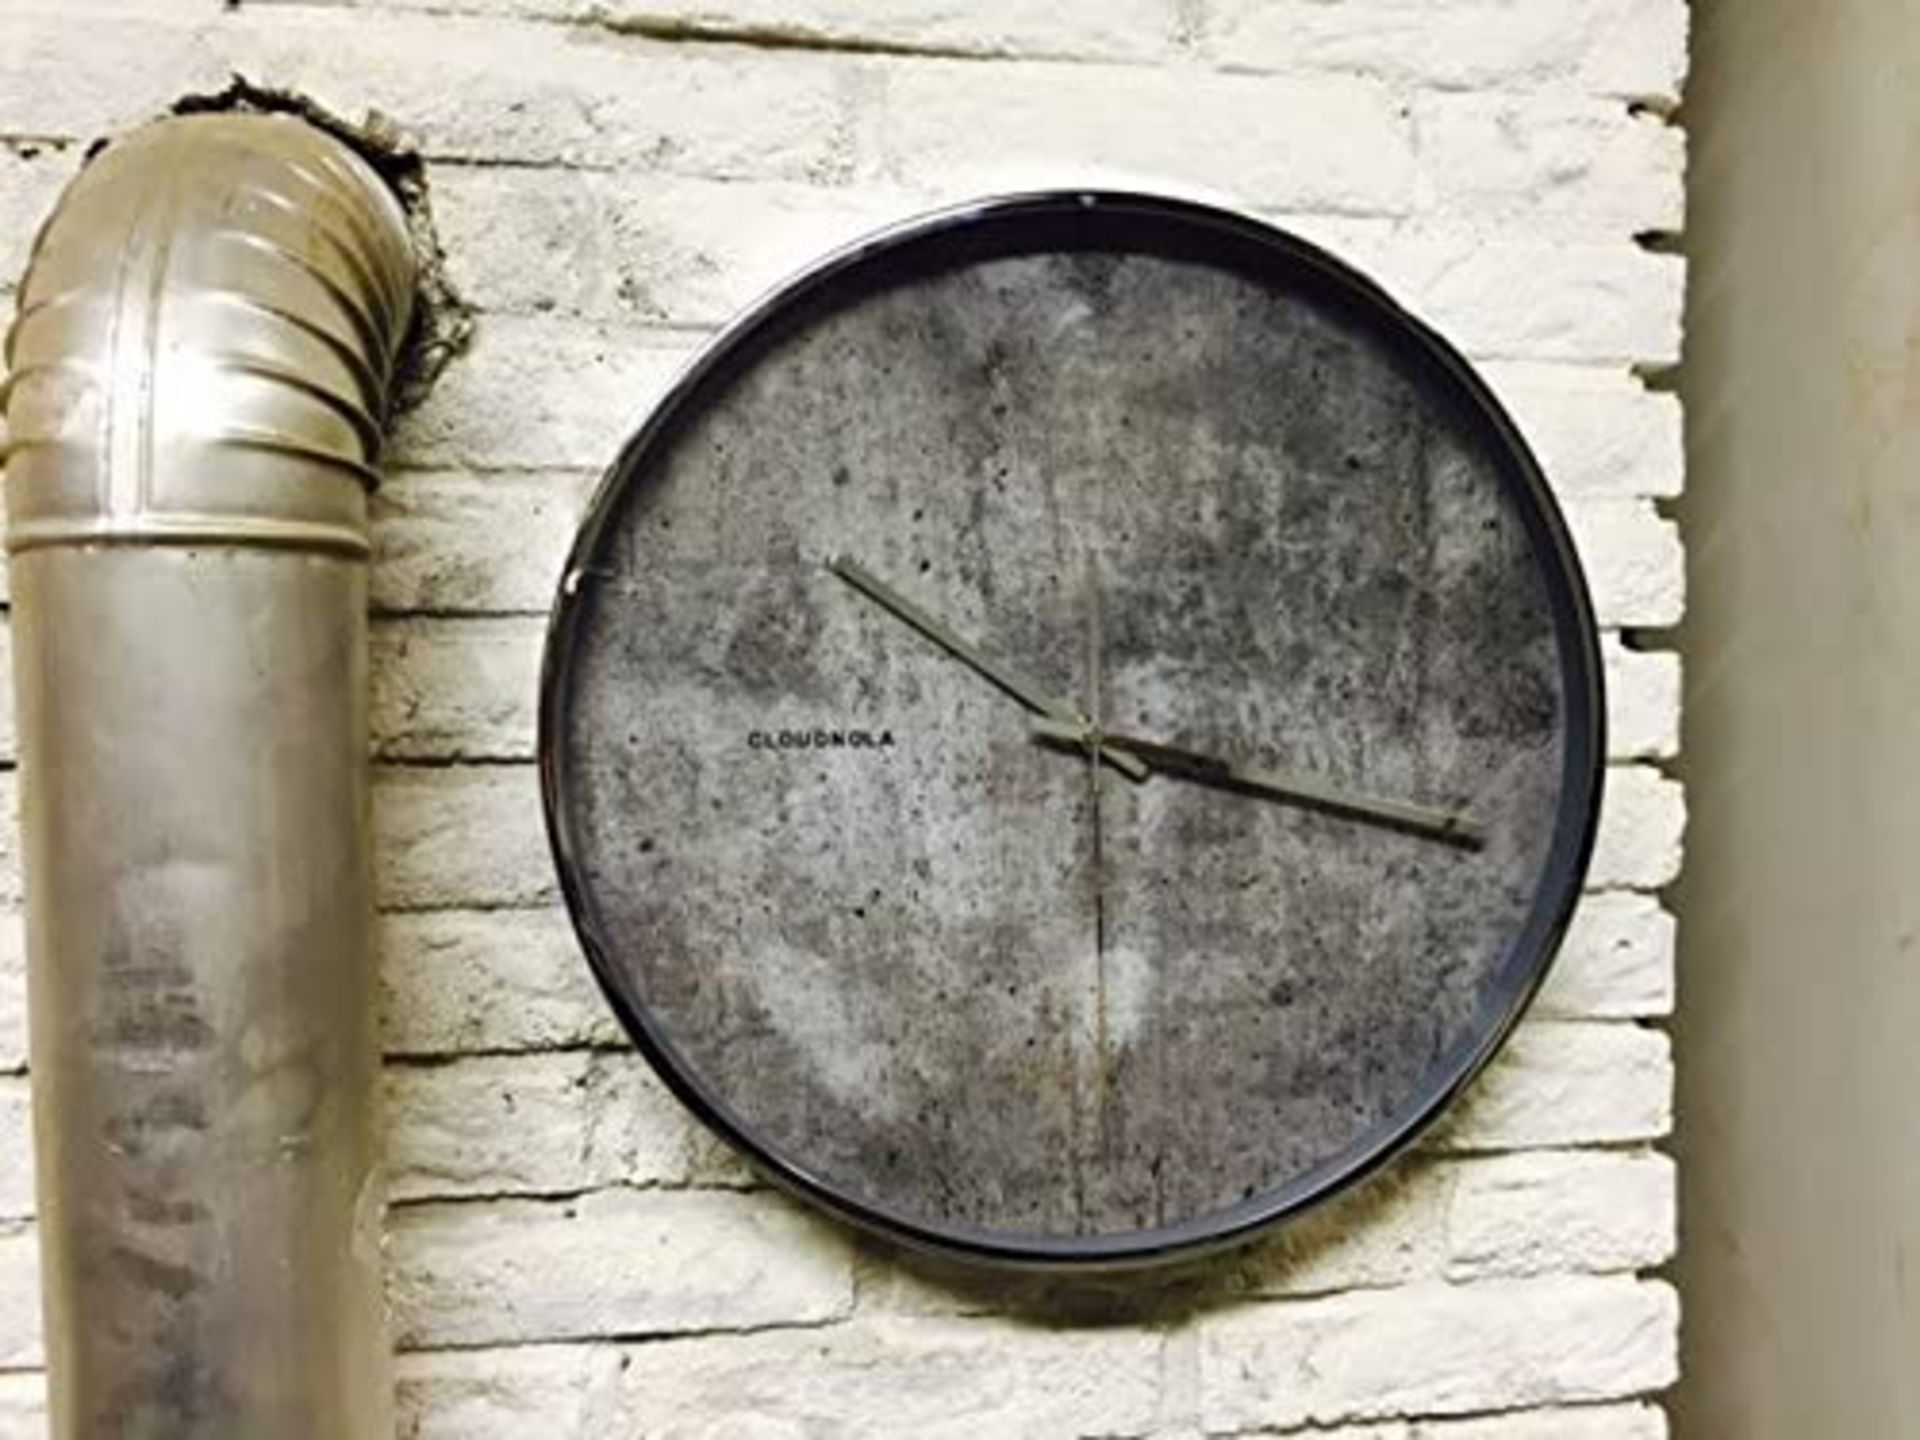 1 x Cloudnola 'Structure' Industrial Style Wall Clock With A Faux Cement Face - Diameter 40cm /